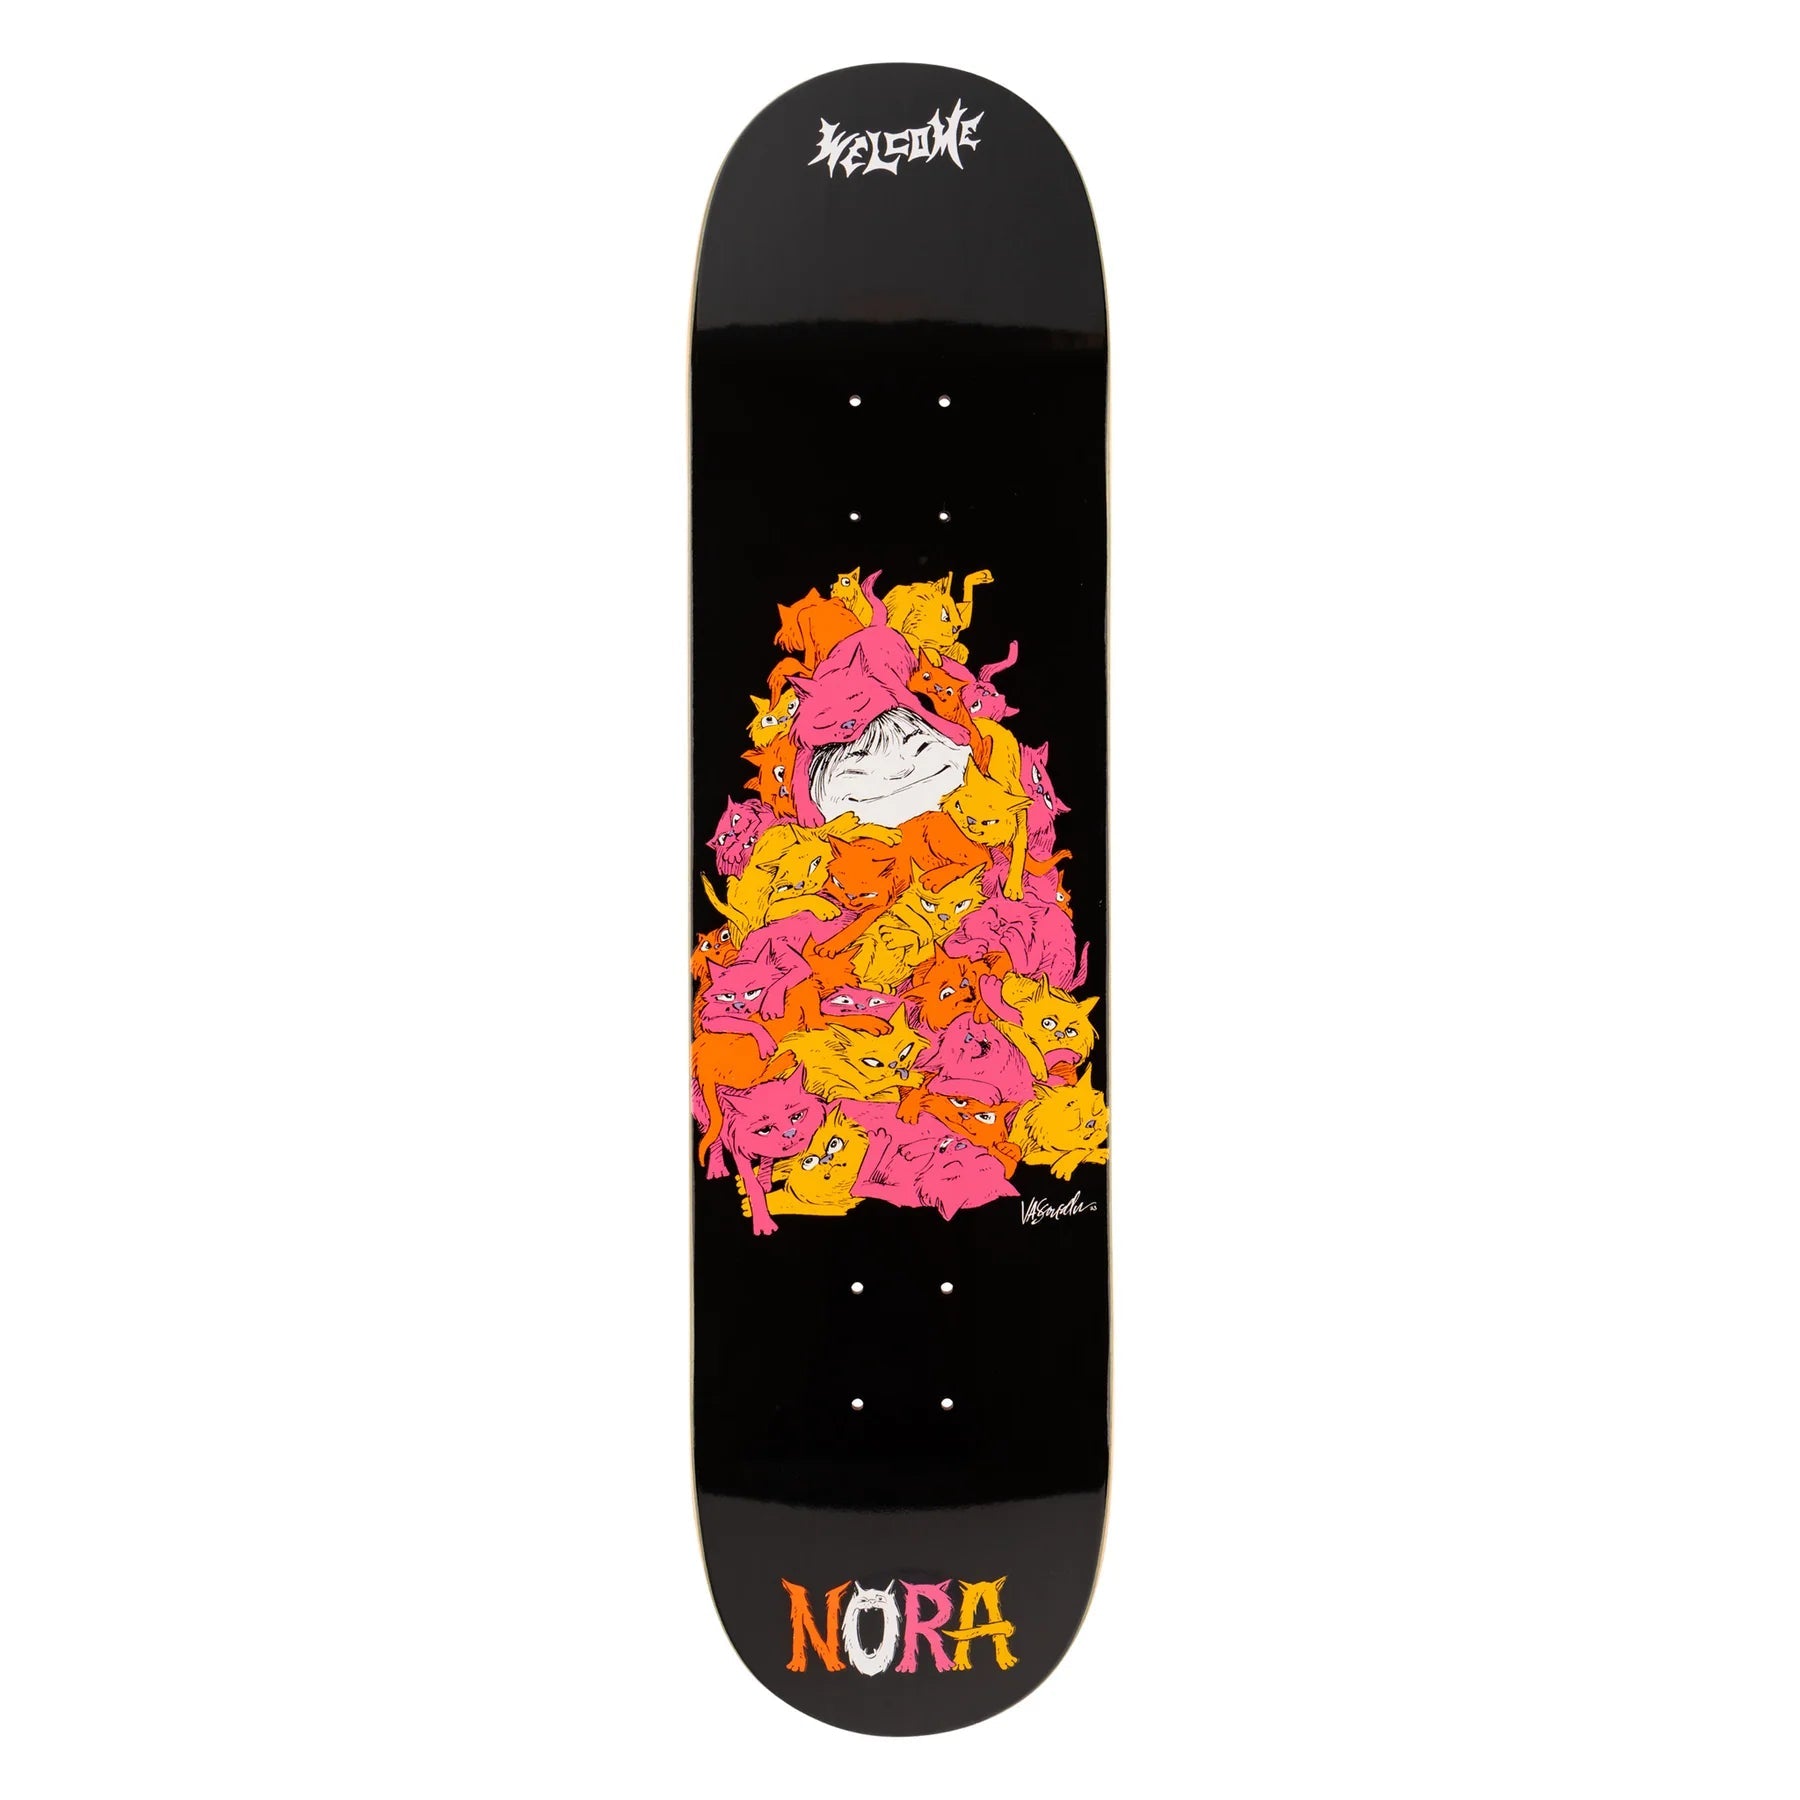 WELCOME Nora Vasconcellos Pure Pile On Popsicle 7.75 Skateboard Deck Skateboard Decks Welcome 